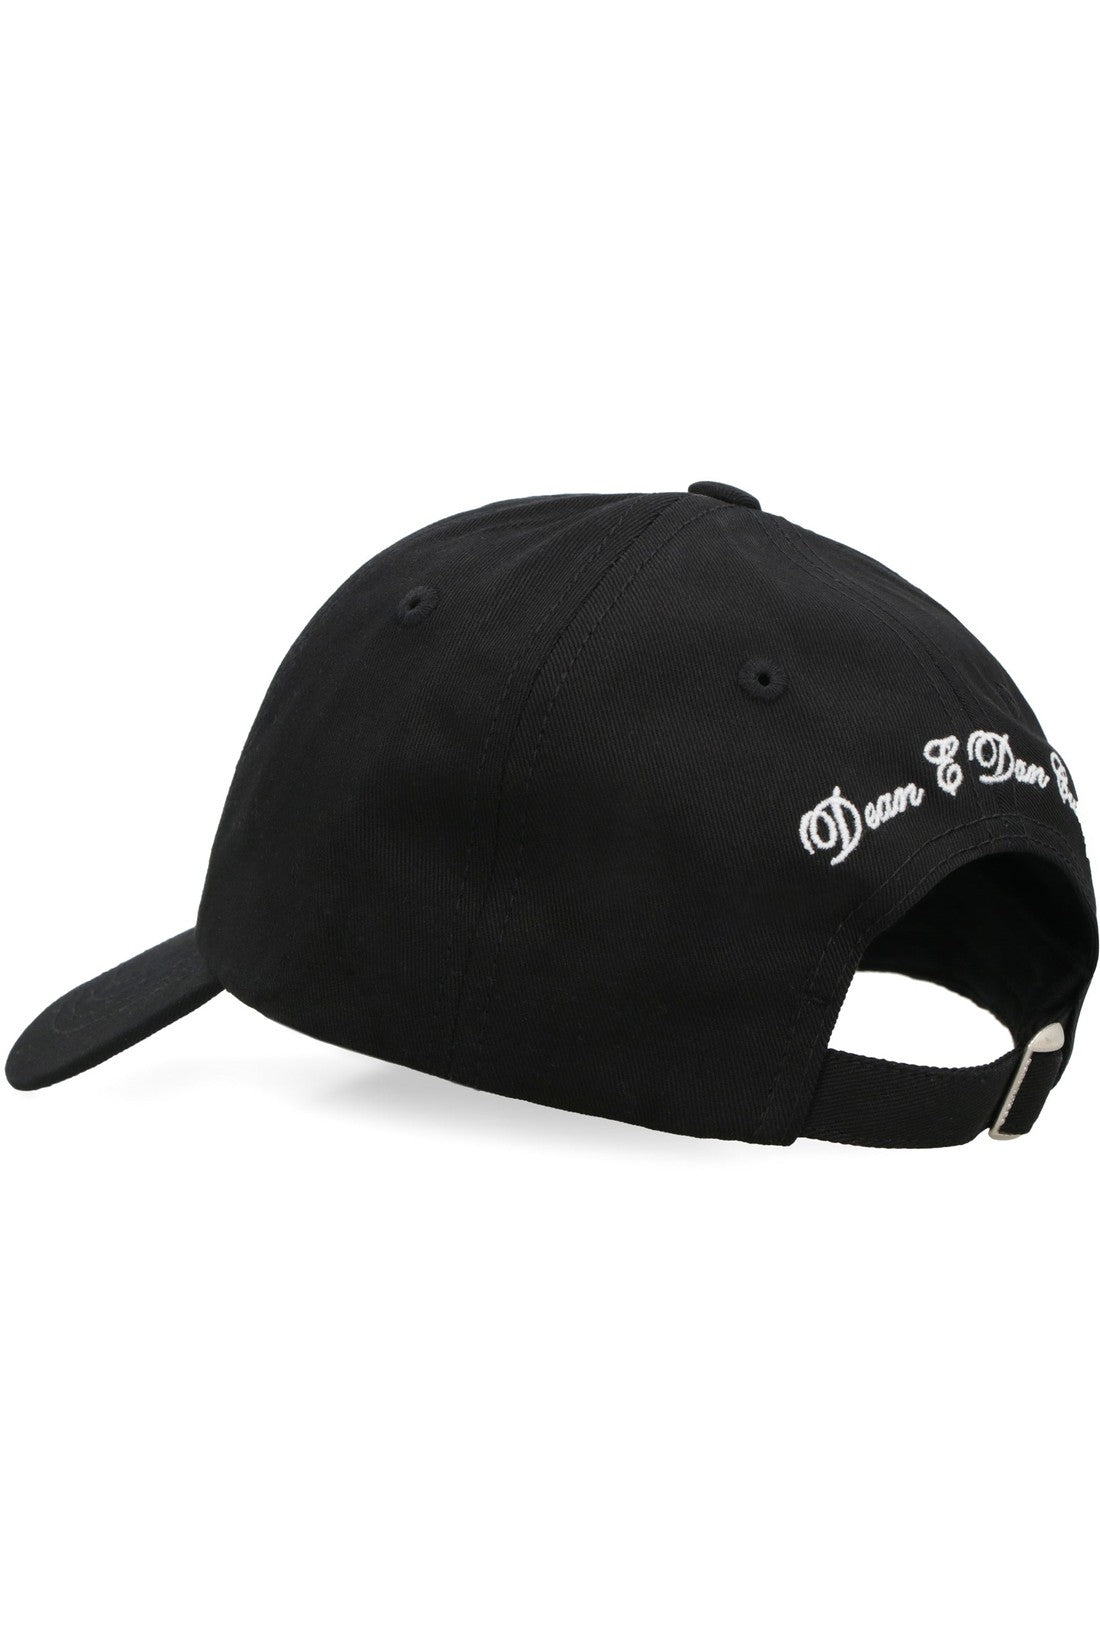 Dsquared2-OUTLET-SALE-Logo embroidery baseball cap-ARCHIVIST